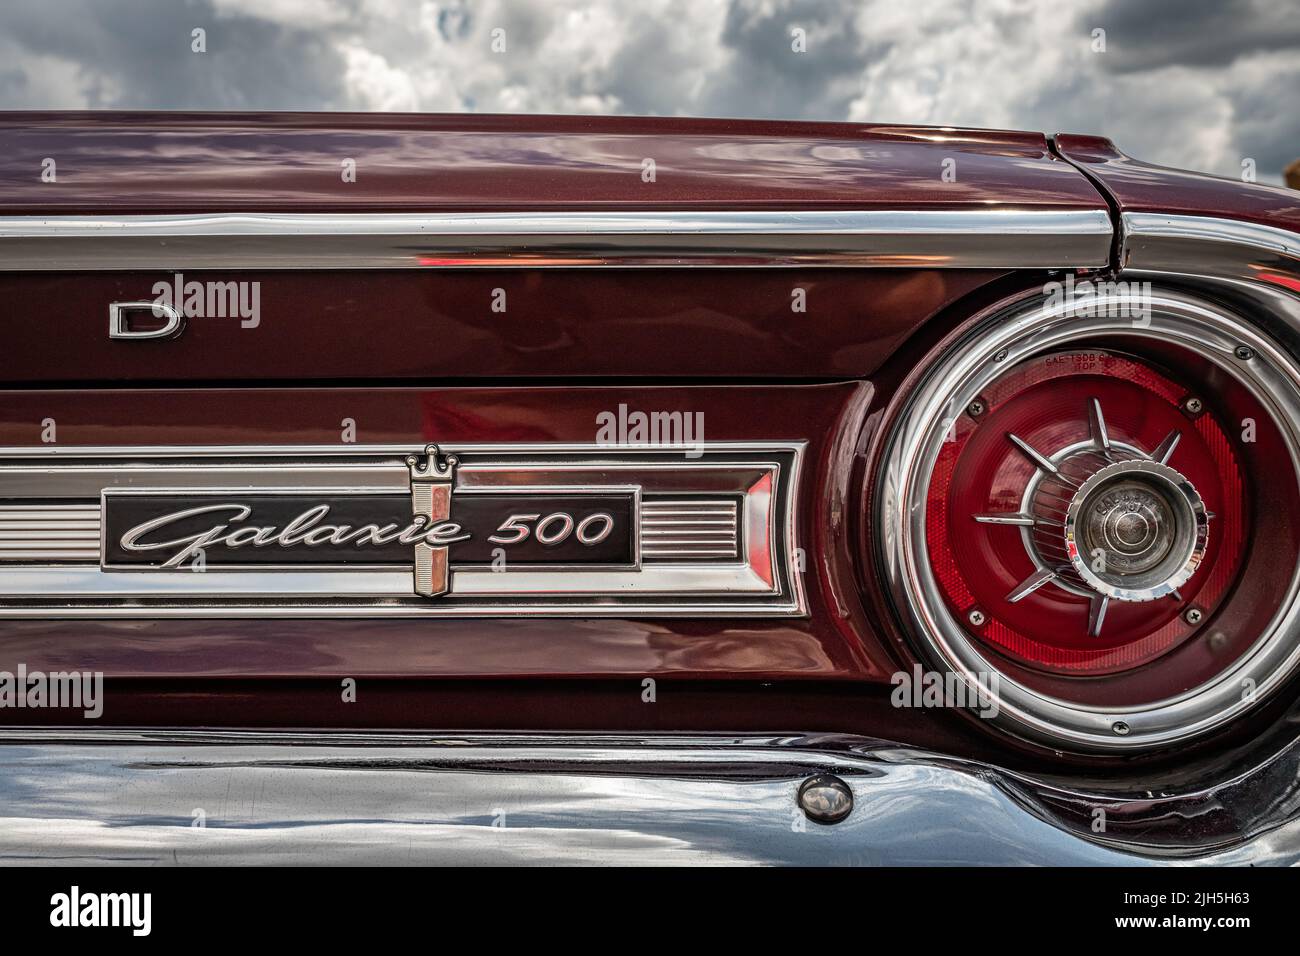 Lebanon, TN - May 14, 2022: Close up detail view of a 1964 Ford Galaxie 500 Convertible taillight assembly at a local car show. Stock Photo